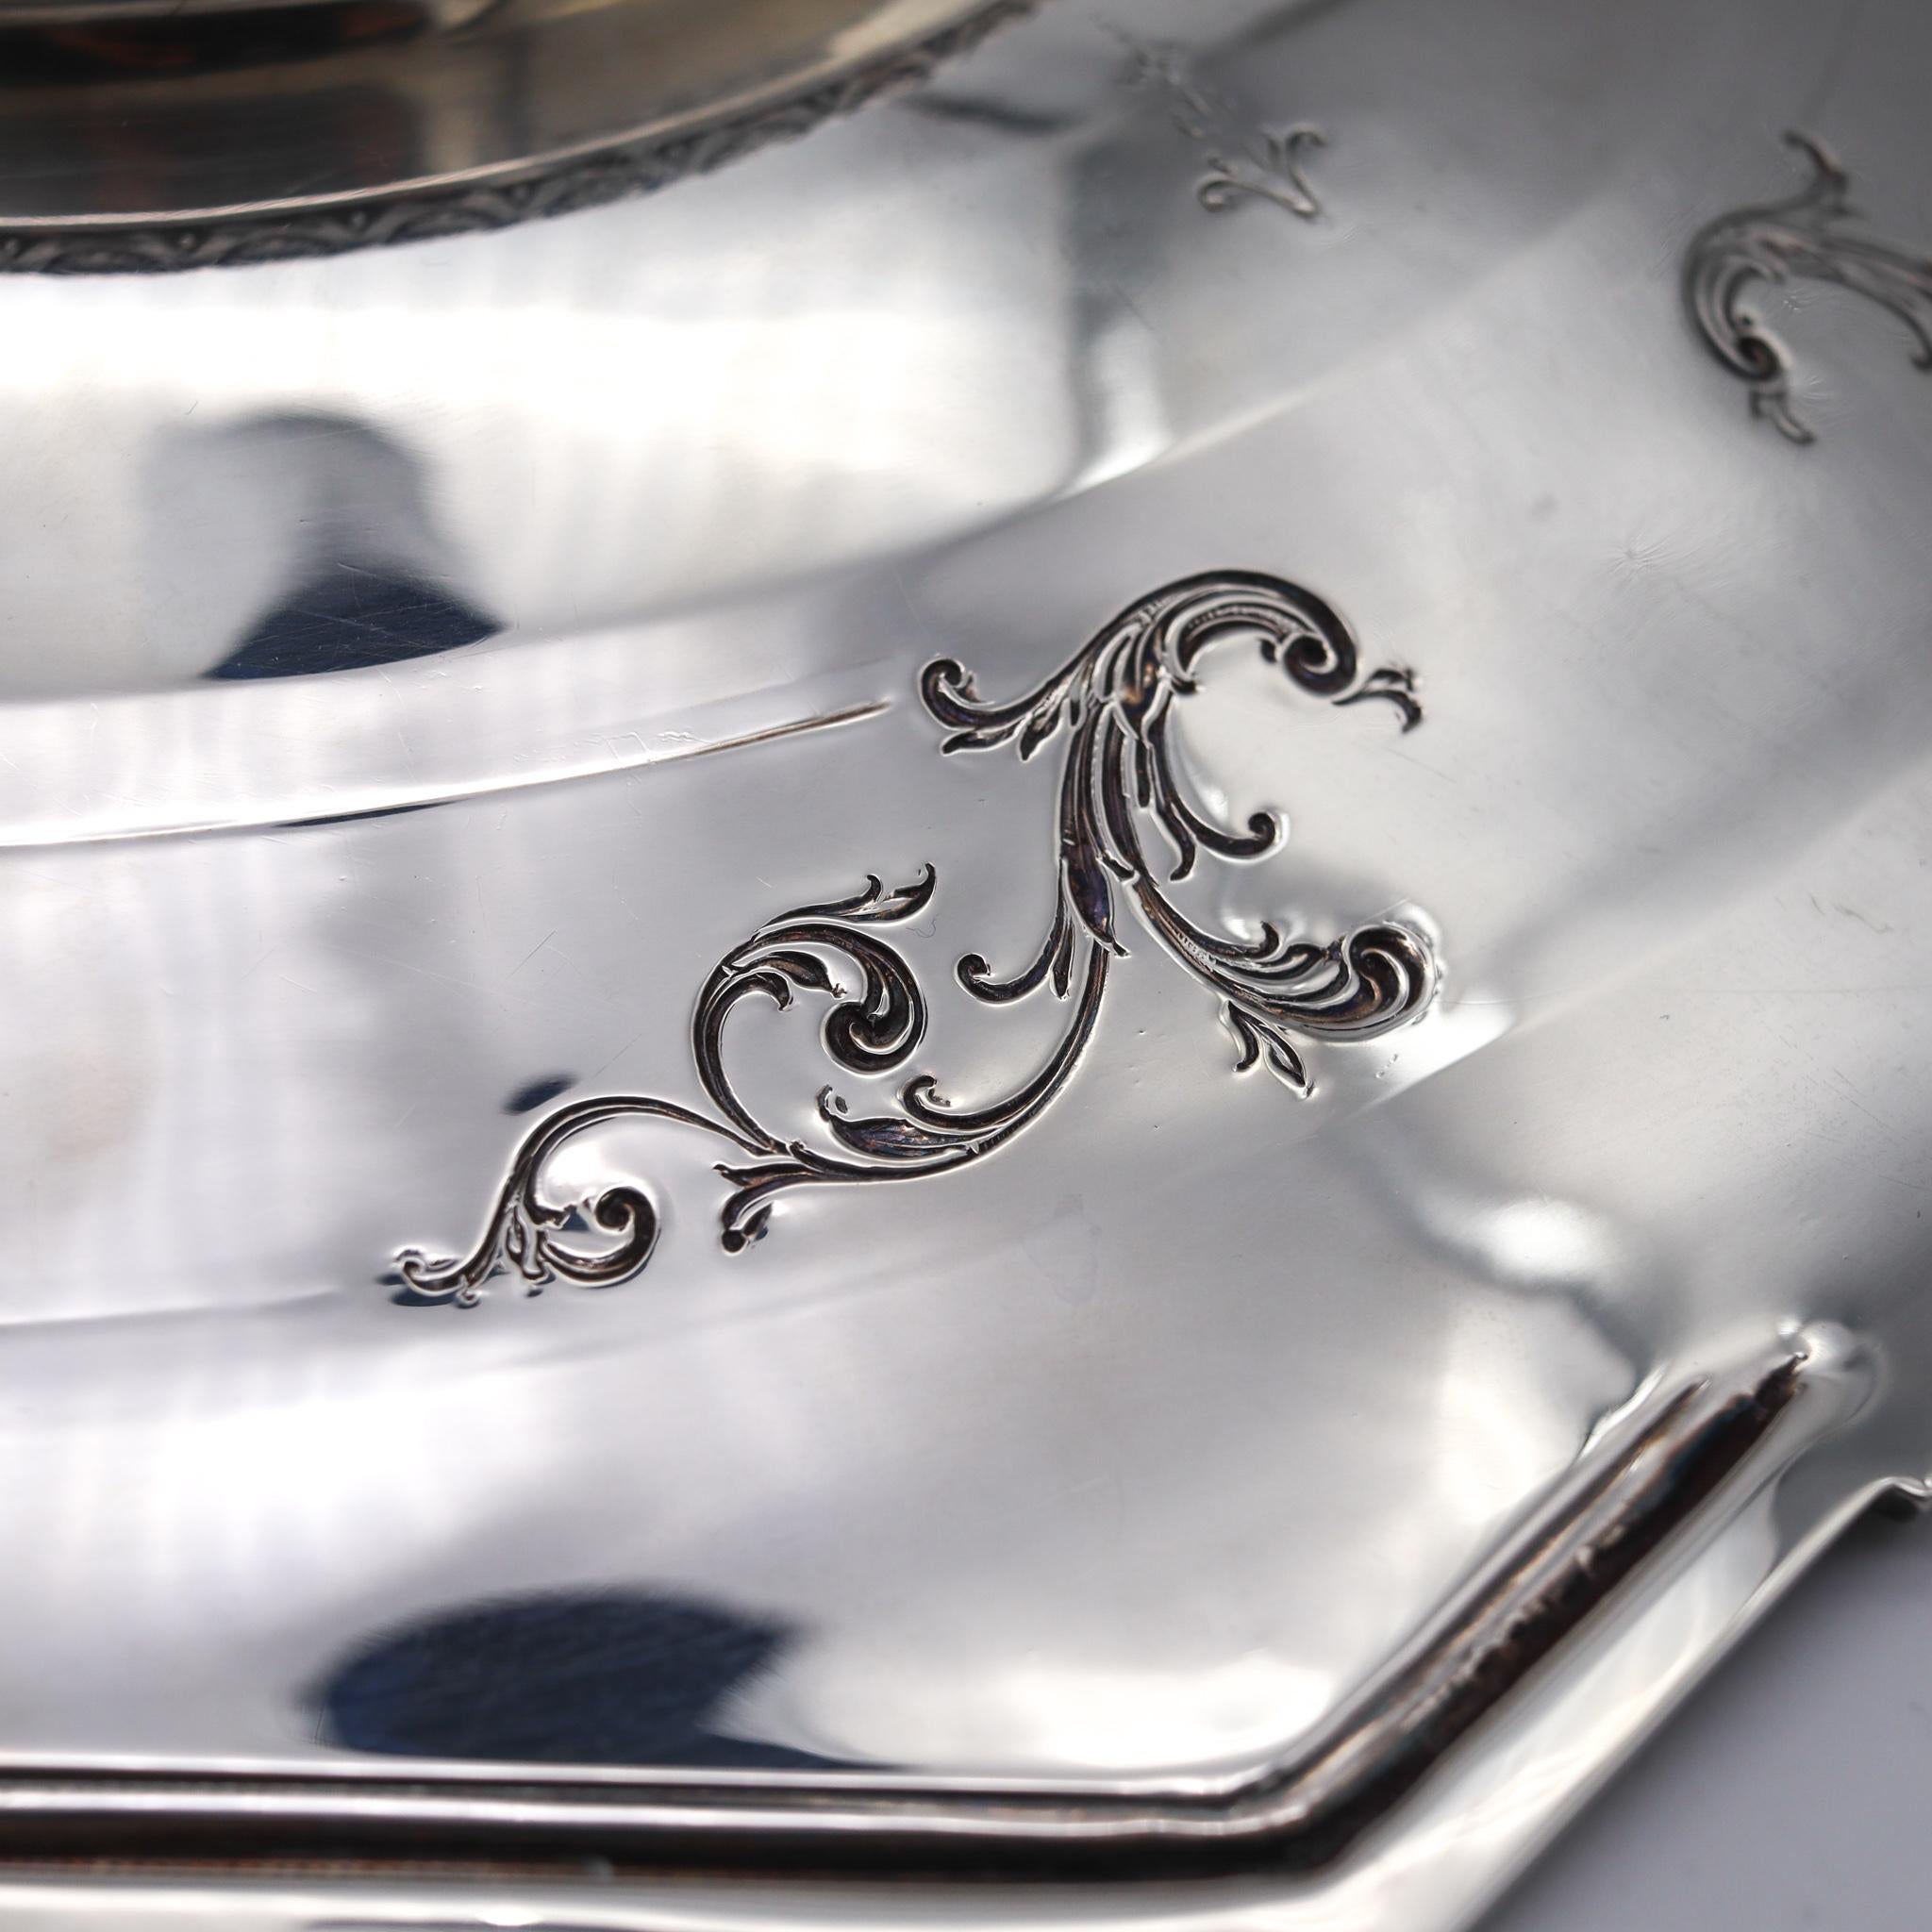 North American Towle & Co. 1890 Edwardian Art Nouveau Octagonal Centerpiece Tray .925 Sterling For Sale